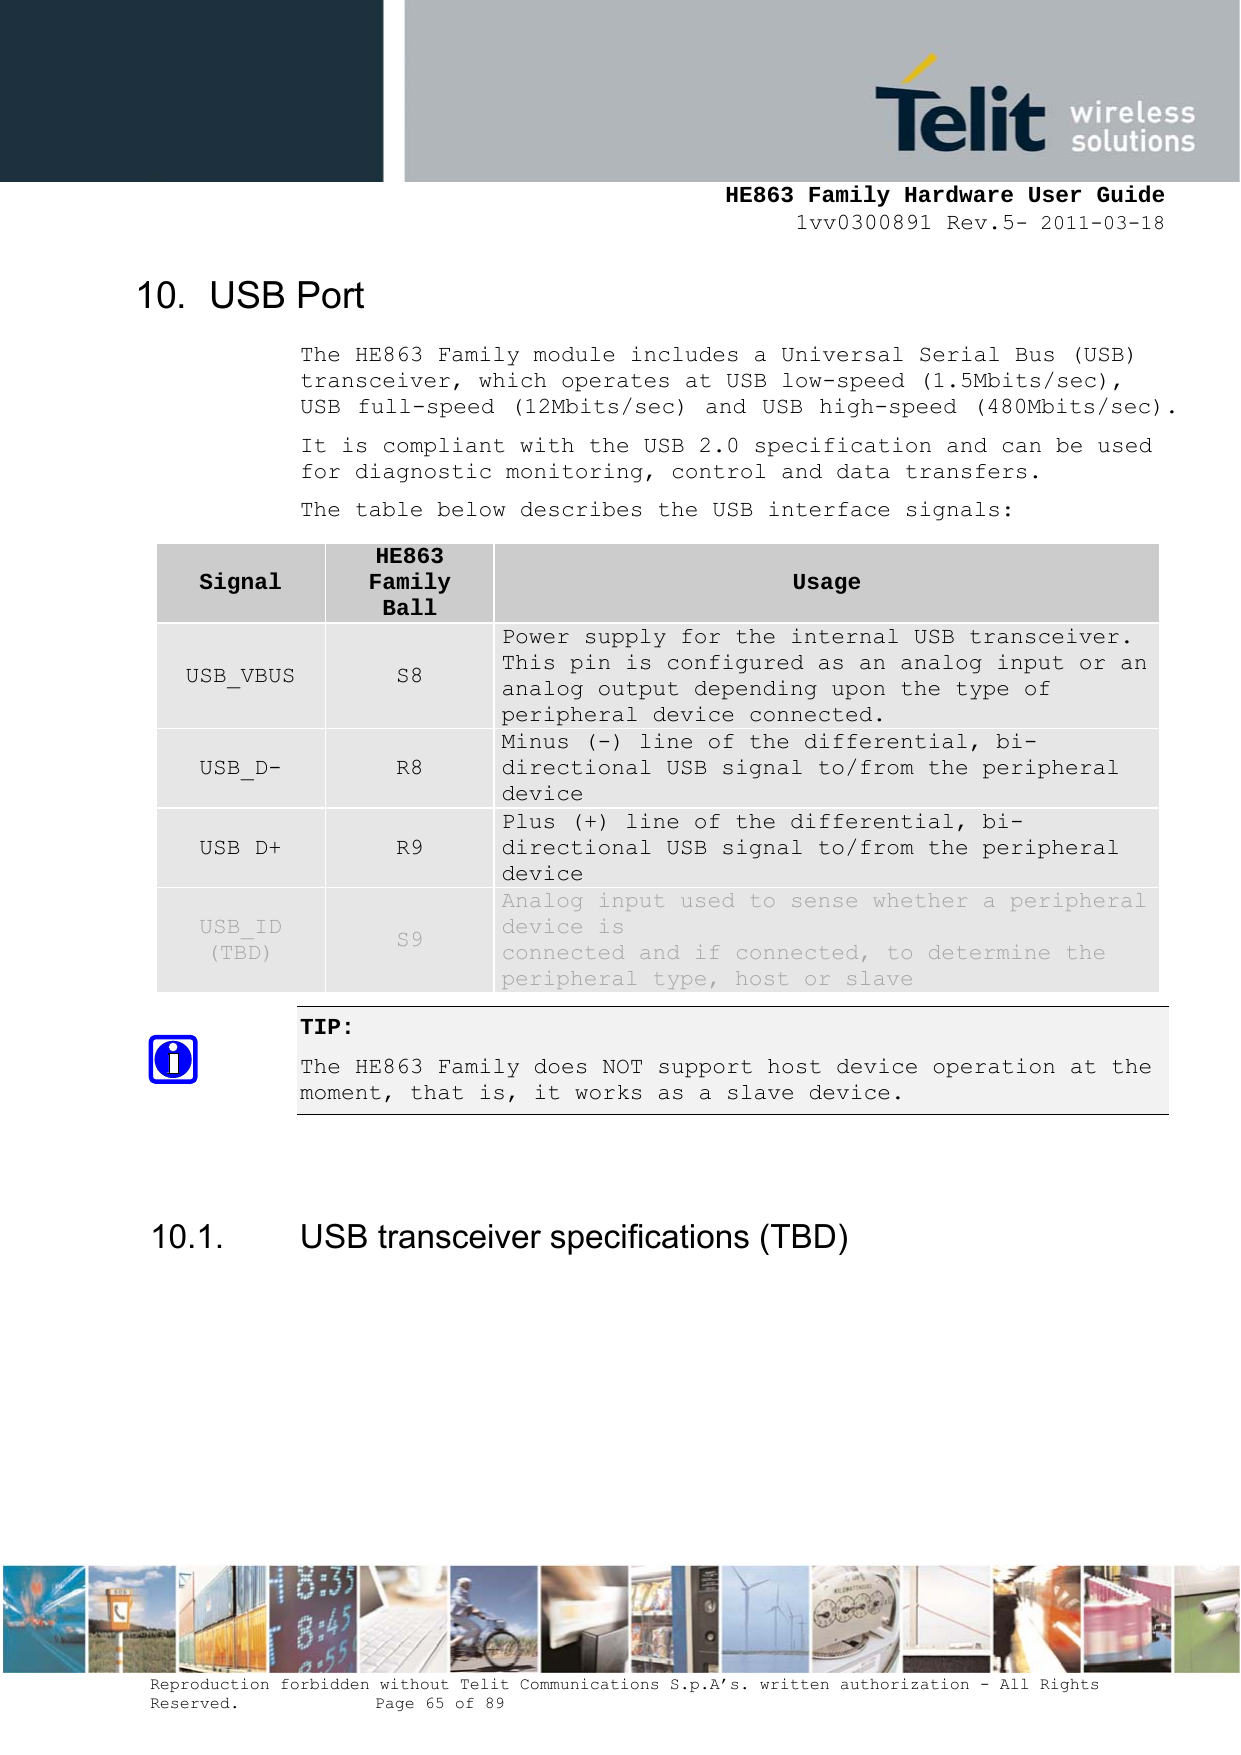     HE863 Family Hardware User Guide 1vv0300891 Rev.5- 2011-03-18    Reproduction forbidden without Telit Communications S.p.A’s. written authorization - All Rights Reserved.    Page 65 of 89  10. USB Port The HE863 Family module includes a Universal Serial Bus (USB) transceiver, which operates at USB low-speed (1.5Mbits/sec), USB full-speed (12Mbits/sec) and USB high-speed (480Mbits/sec). It is compliant with the USB 2.0 specification and can be used for diagnostic monitoring, control and data transfers. The table below describes the USB interface signals: TIP:  The HE863 Family does NOT support host device operation at the moment, that is, it works as a slave device.   10.1.  USB transceiver specifications (TBD) Signal HE863 Family Ball  Usage USB_VBUS  S8 Power supply for the internal USB transceiver. This pin is configured as an analog input or ananalog output depending upon the type of peripheral device connected. USB_D-  R8 Minus (-) line of the differential, bi-directional USB signal to/from the peripheral device USB D+  R9 Plus (+) line of the differential, bi-directional USB signal to/from the peripheral device USB_ID (TBD)  S9 Analog input used to sense whether a peripheral device is connected and if connected, to determine the peripheral type, host or slave 